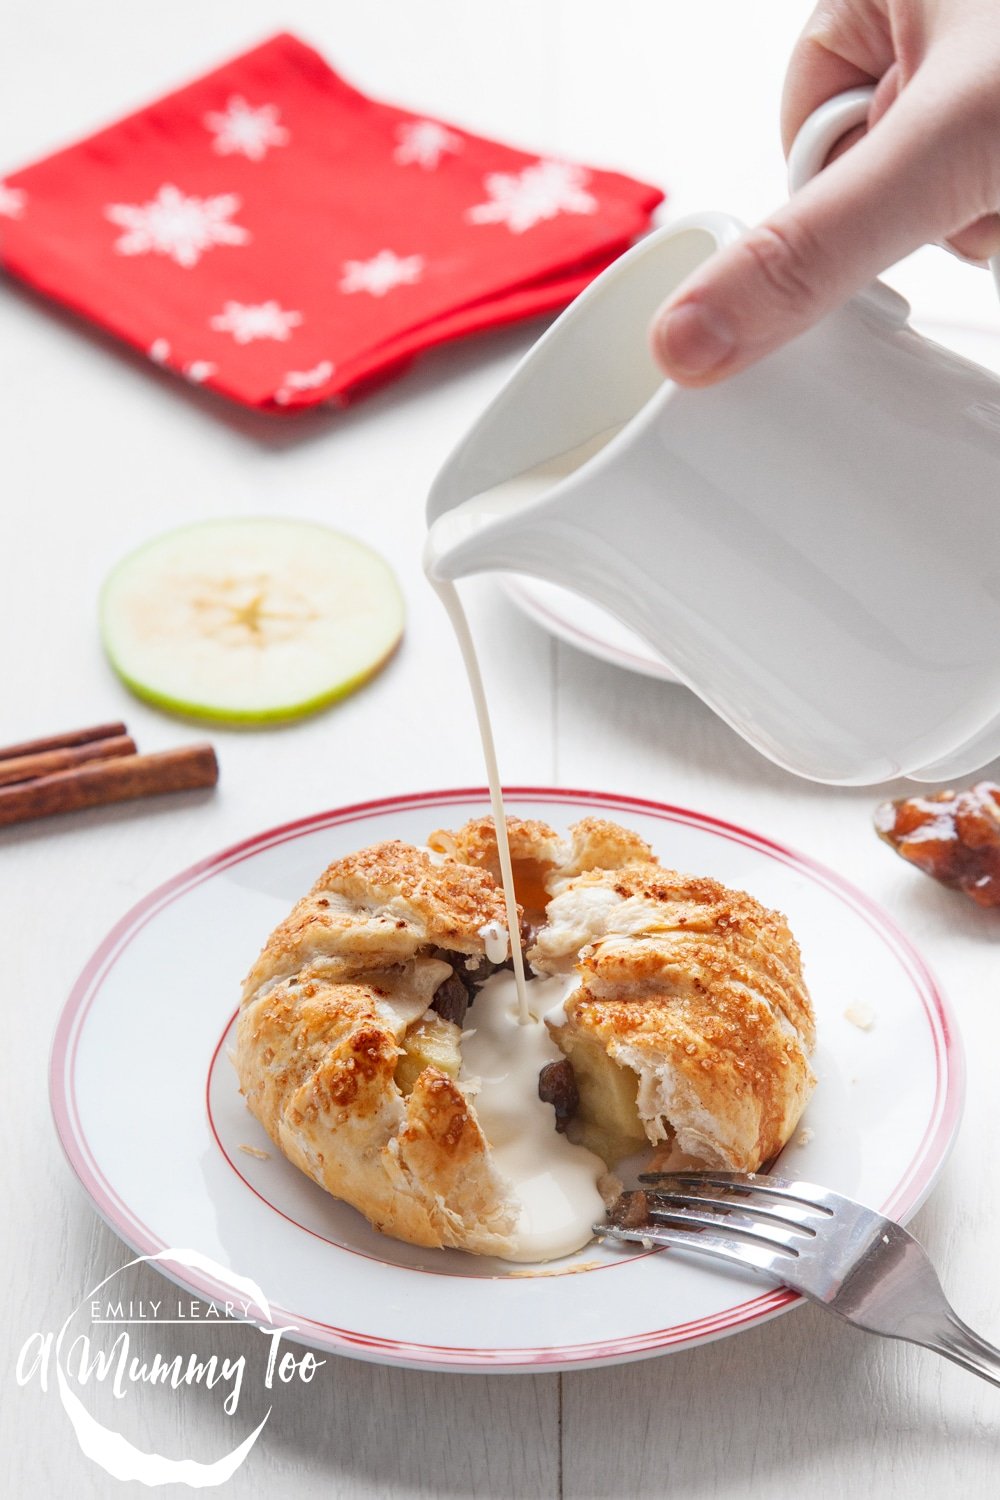 These apple and mincemeat sweet puff parcels make for a tasty festive treat